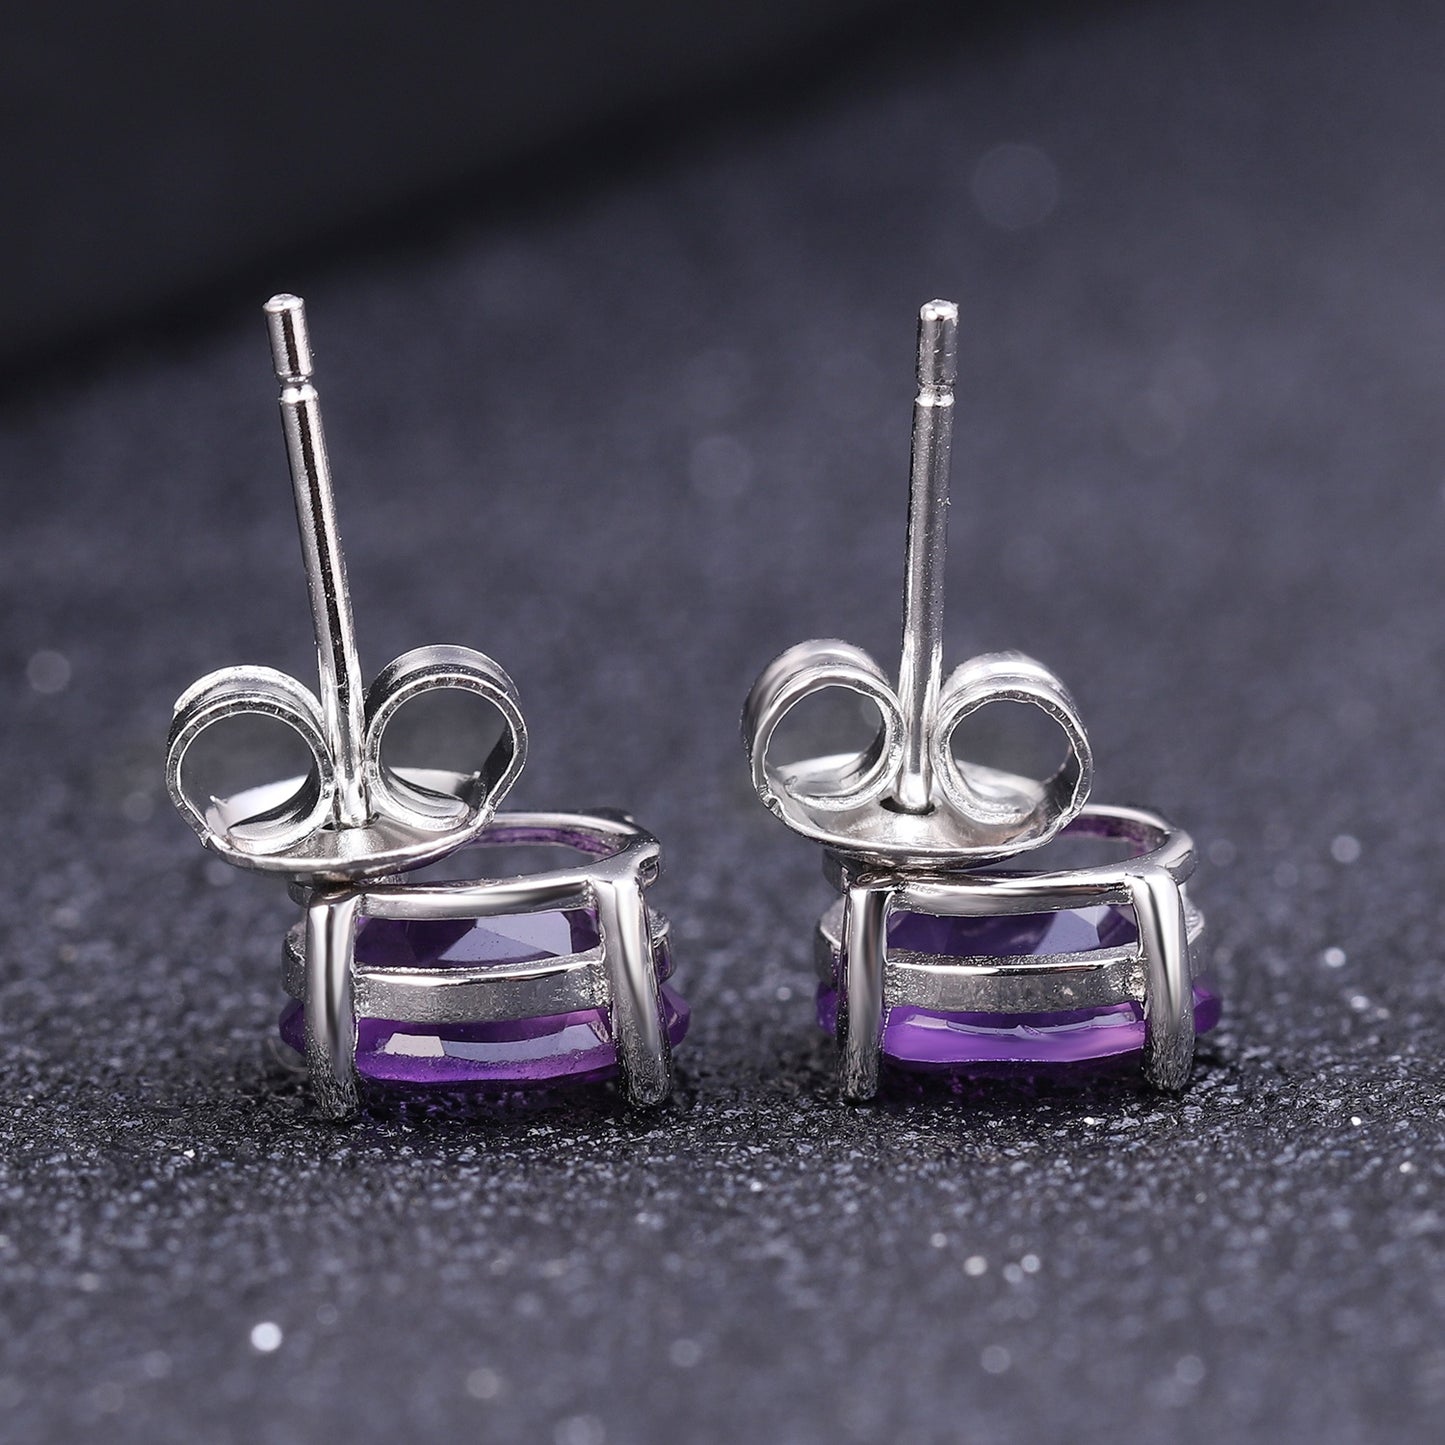 Amethyst Solitaire Earrings - Oval Cut - Gems and Stuff Semi-Precious gemstones, Free Shipping Fine Jewellery Sterling Silver 925